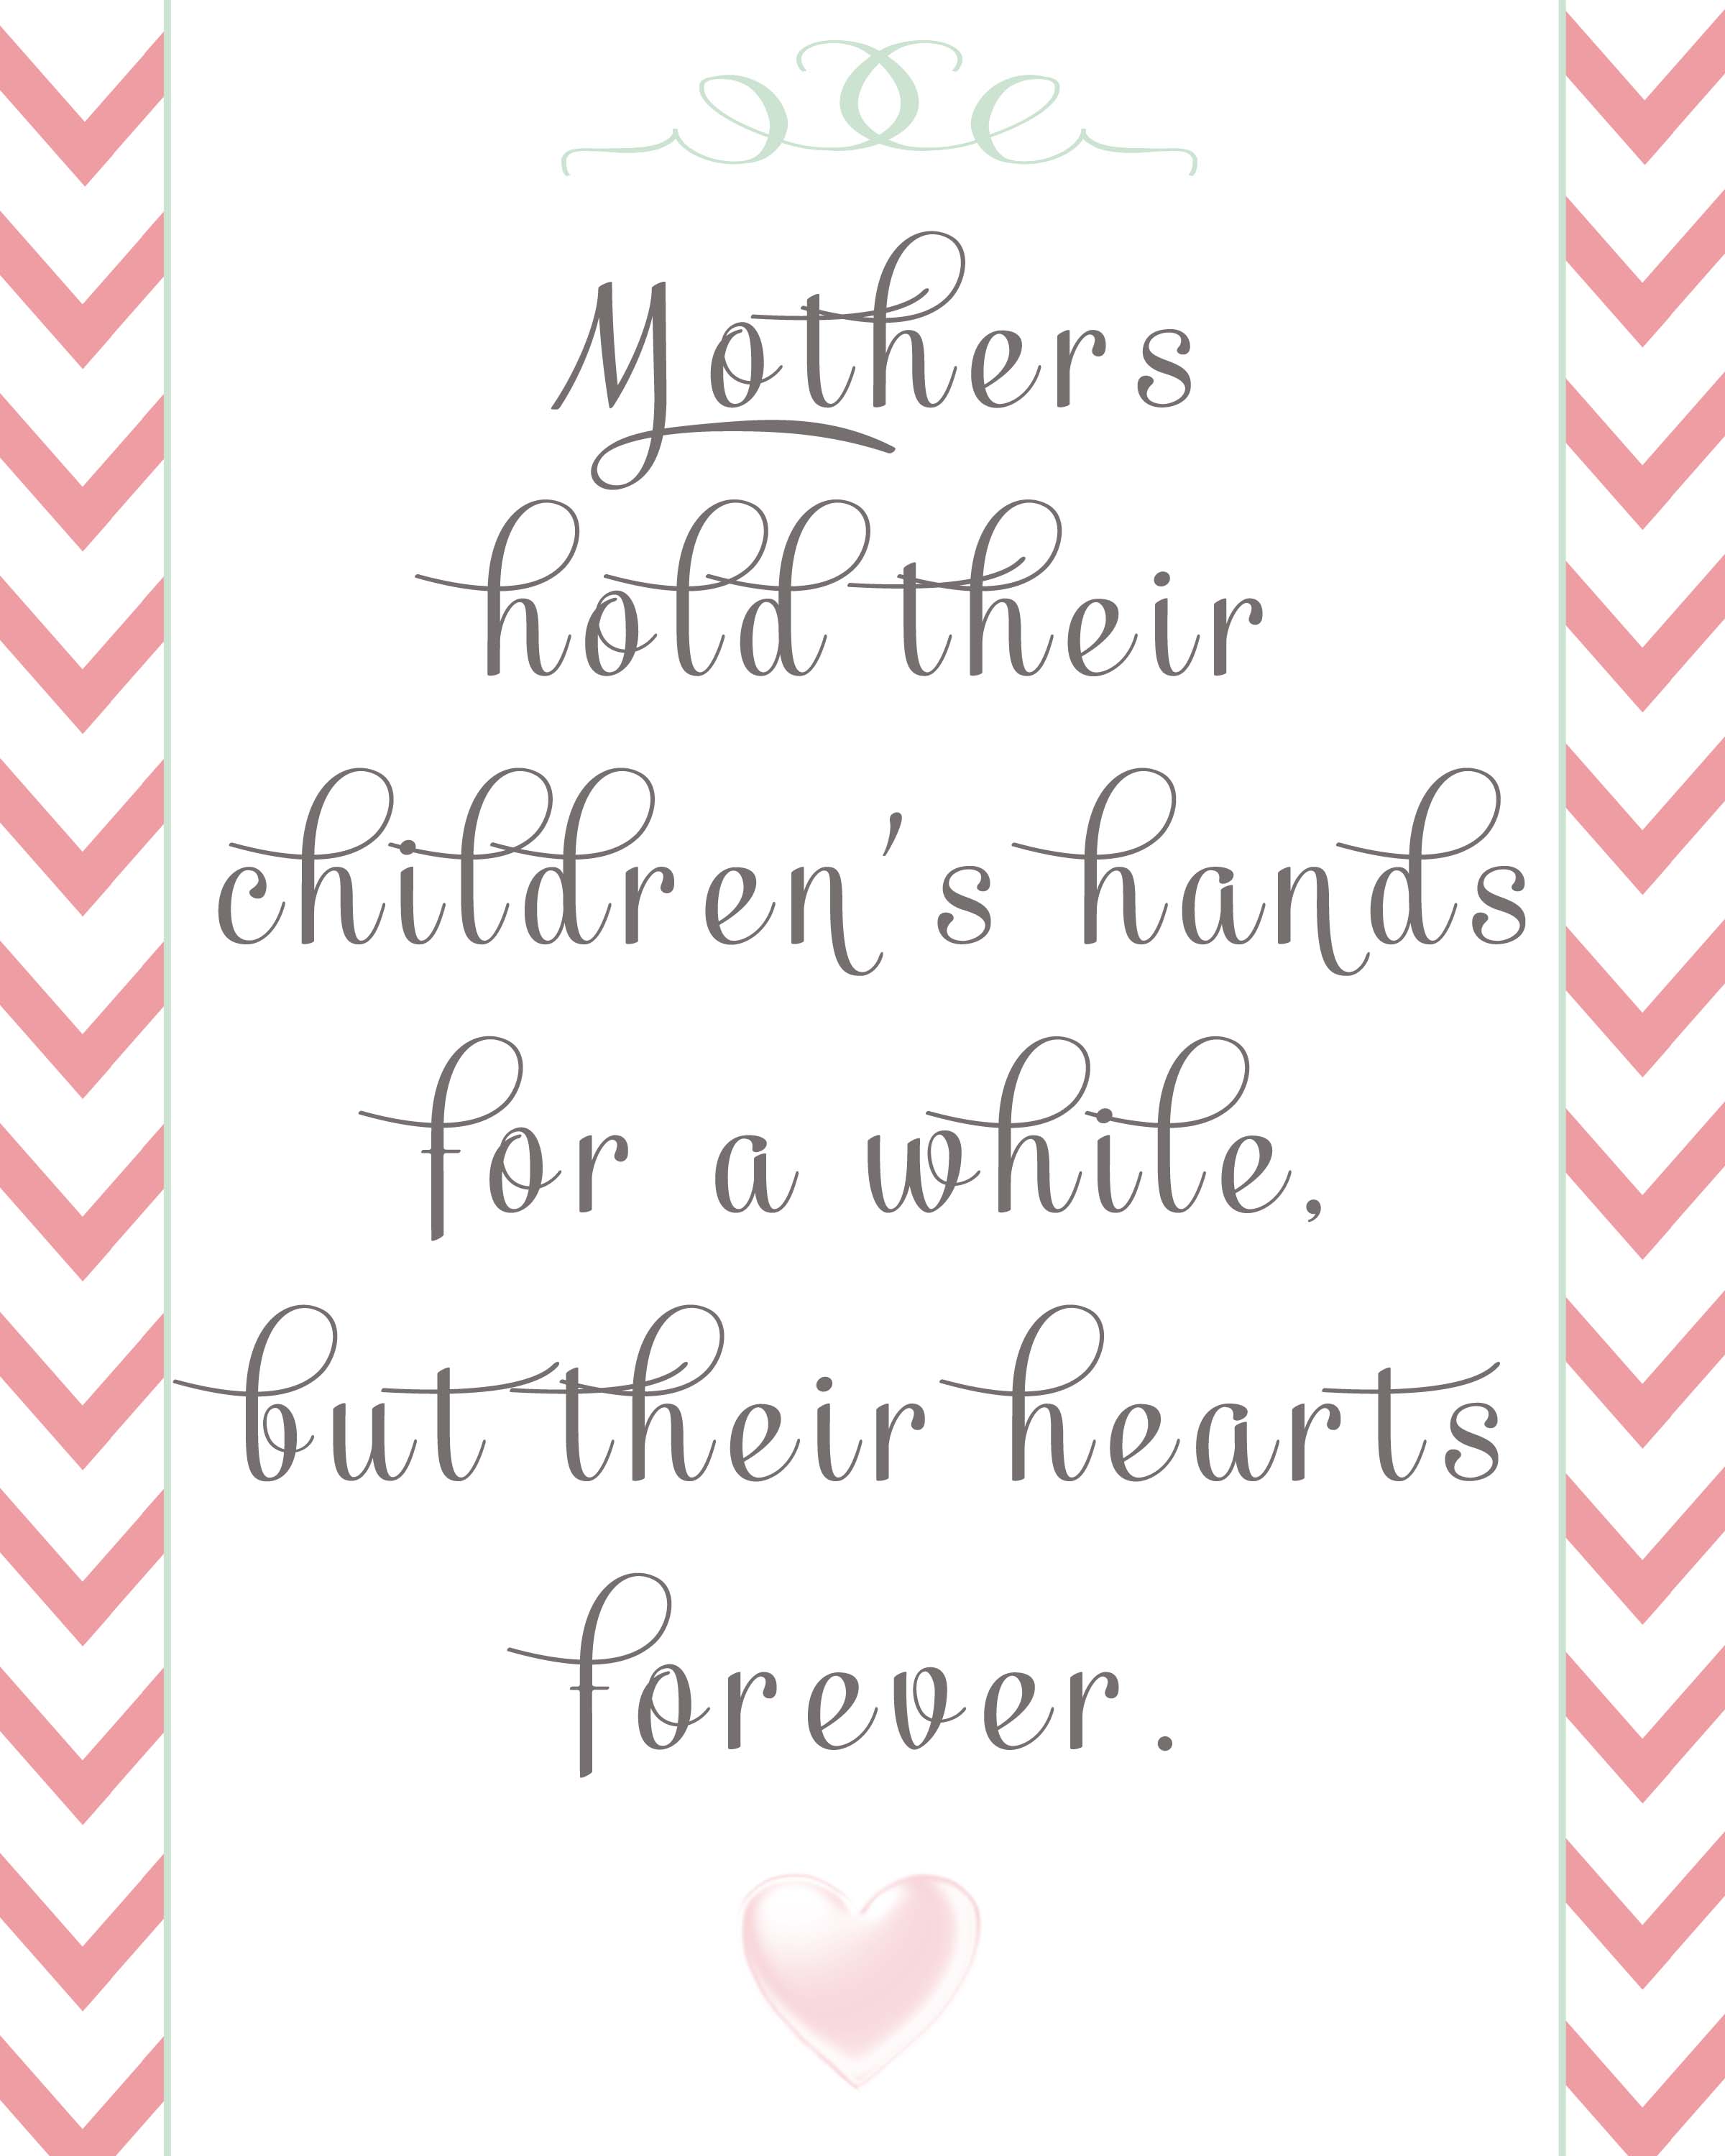 Free Mother's Day Quote 8x10 #Mother's Day #Free Mother's Day Printable #Free Printable